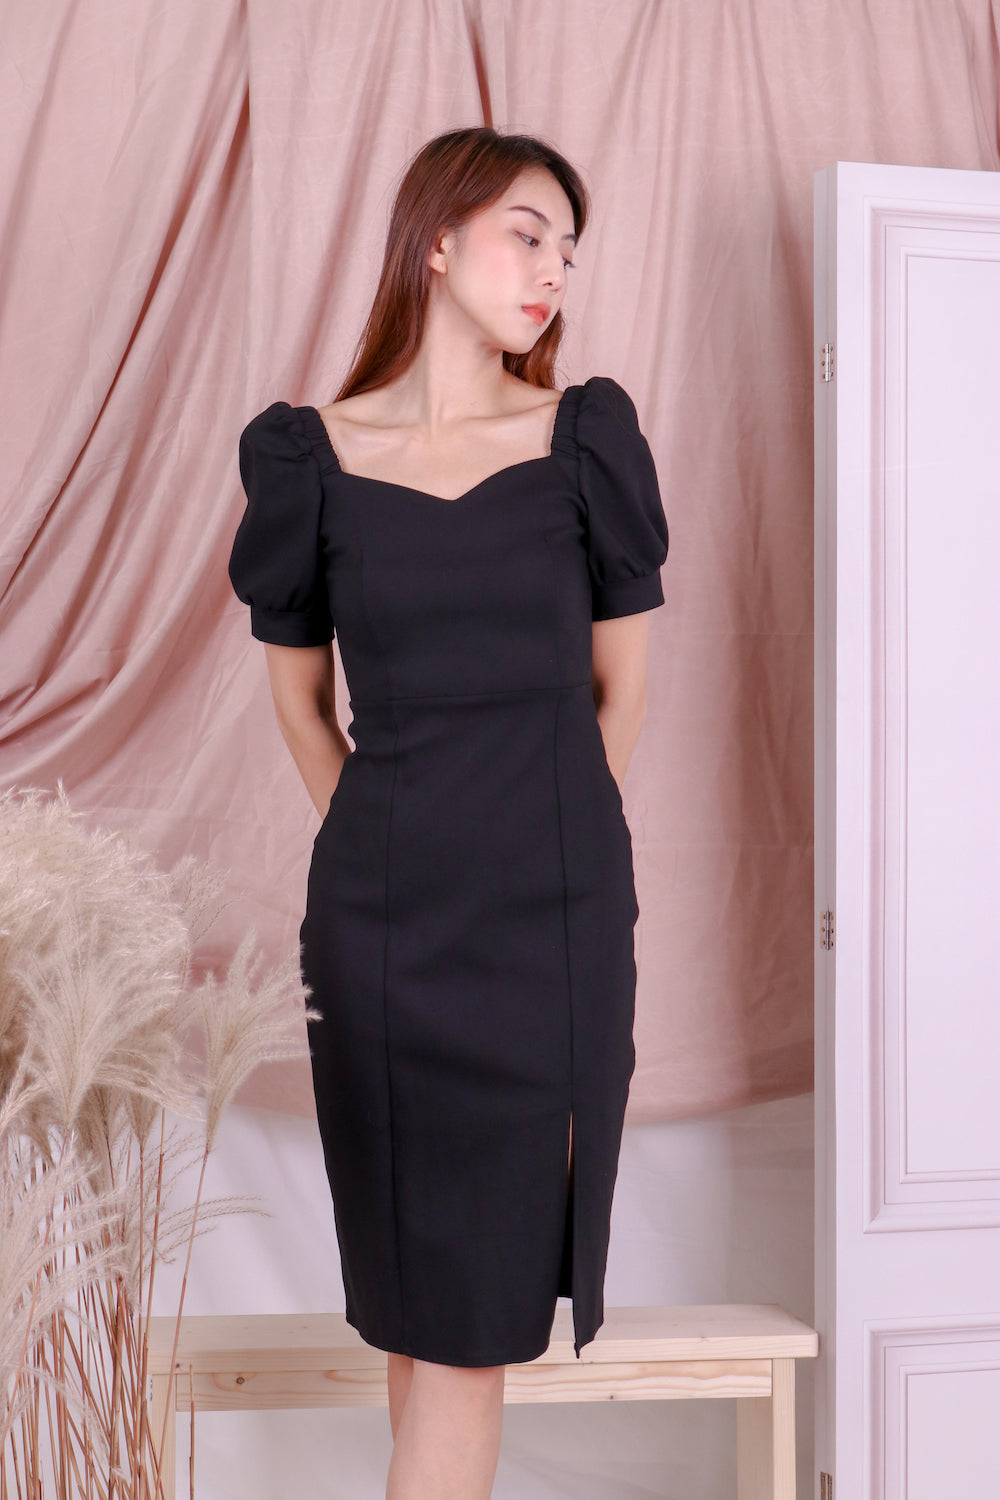 *PREMIUM* Yveslia 2 Ways Bodycon Dress in Black - Self Manufactured by LBRLABEL only